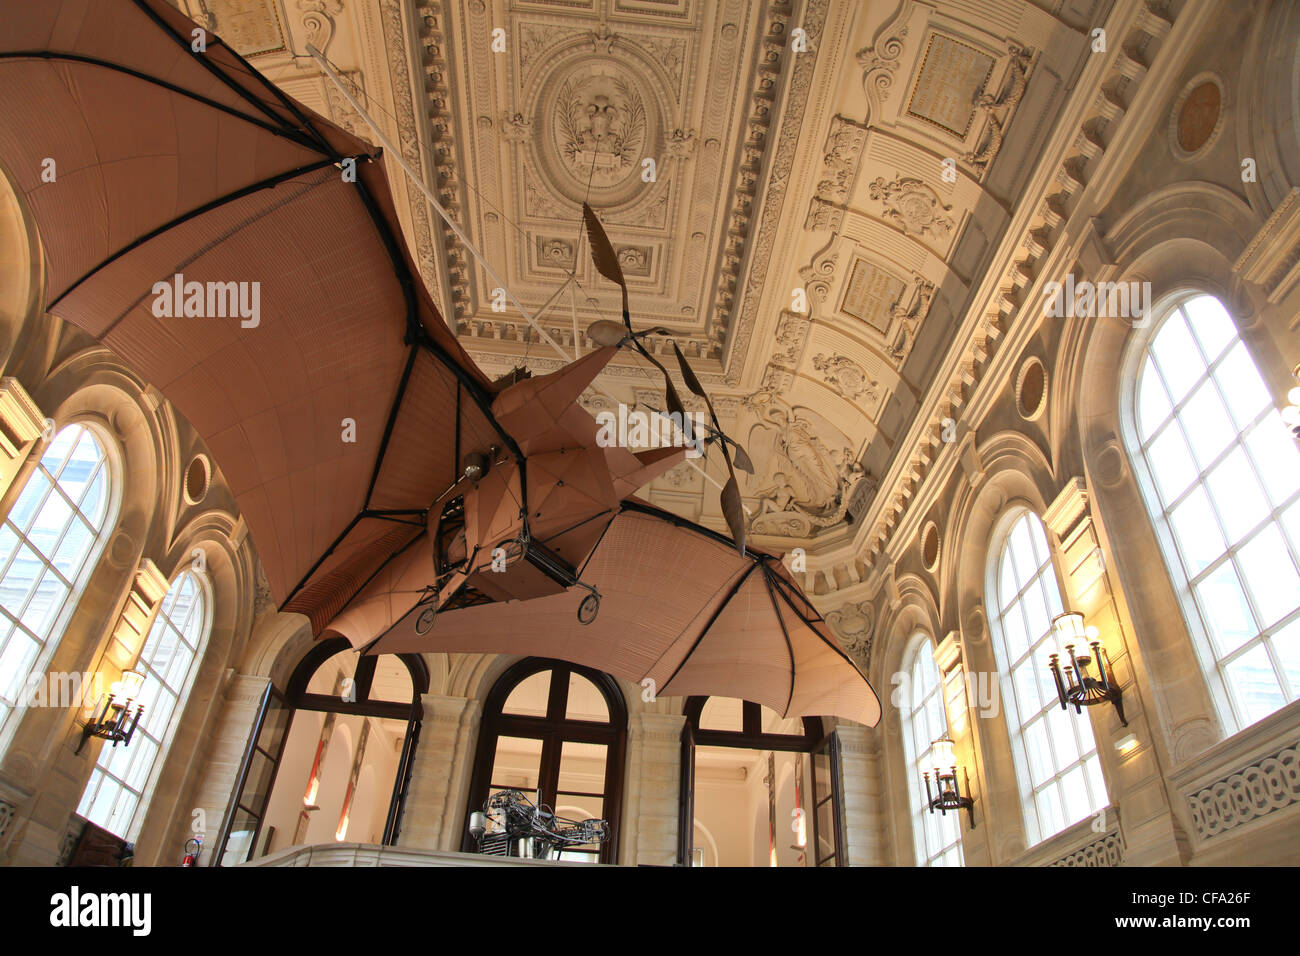 Flying machine - Invention Museum Paris France Stock Photo